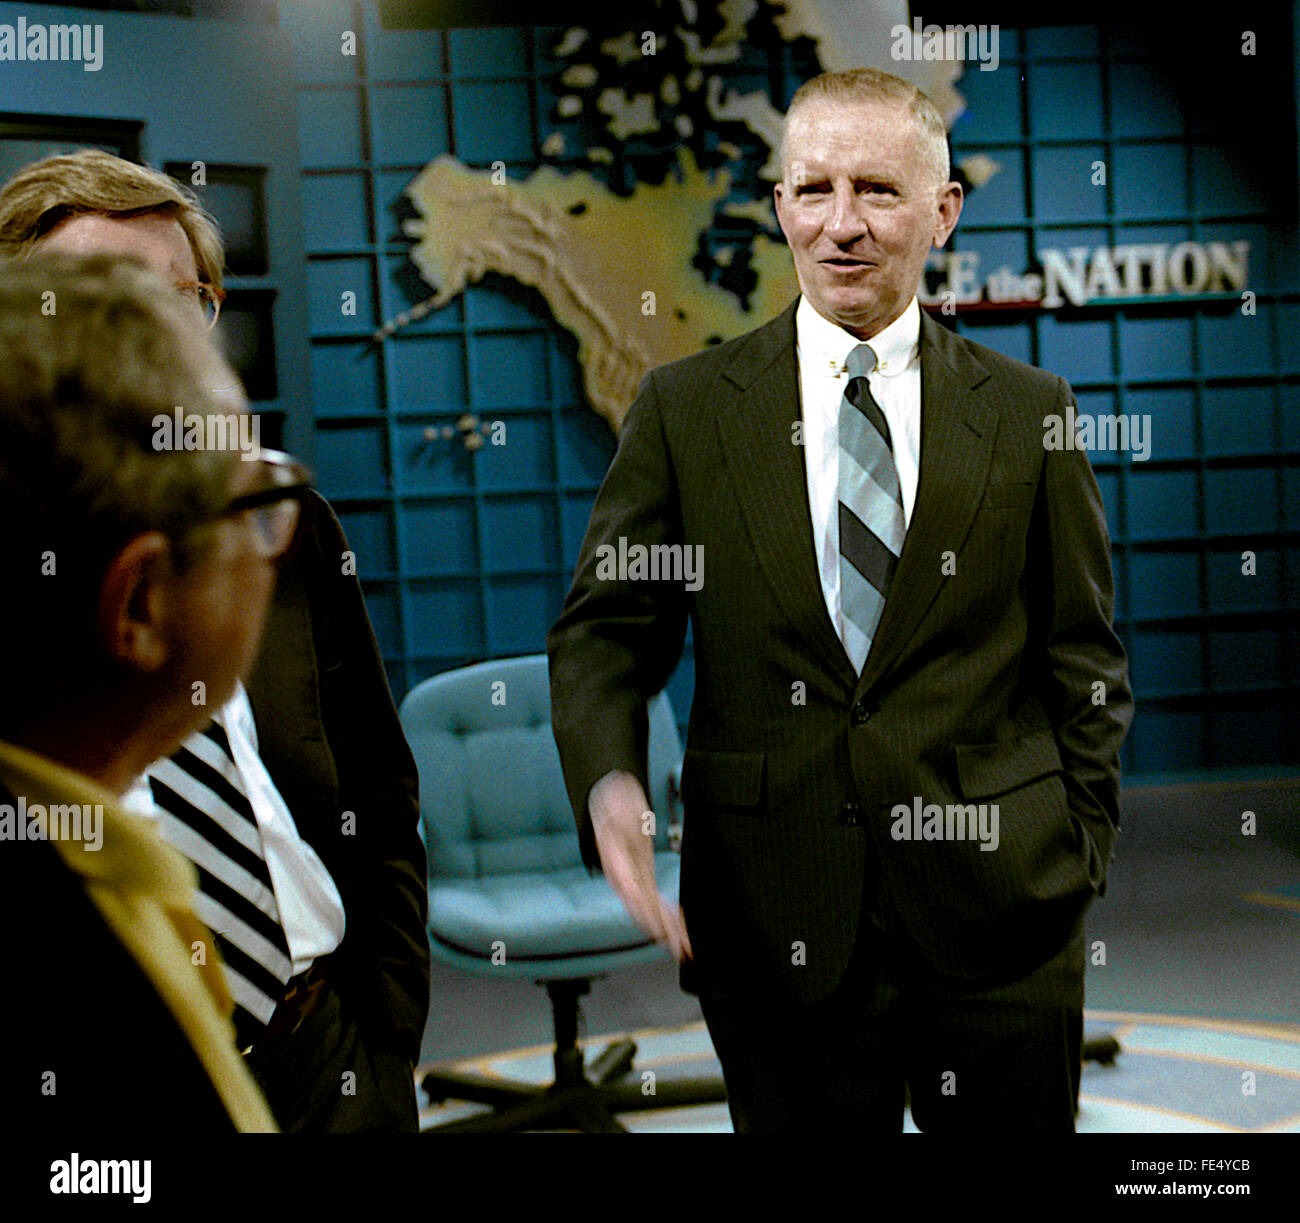 Washington, DC. USA, 26th April, 1992 H.Ross Perot at CBS Sunday Morning "Face The Nation" talk show Credit: Mark Reinstein Stock Photo